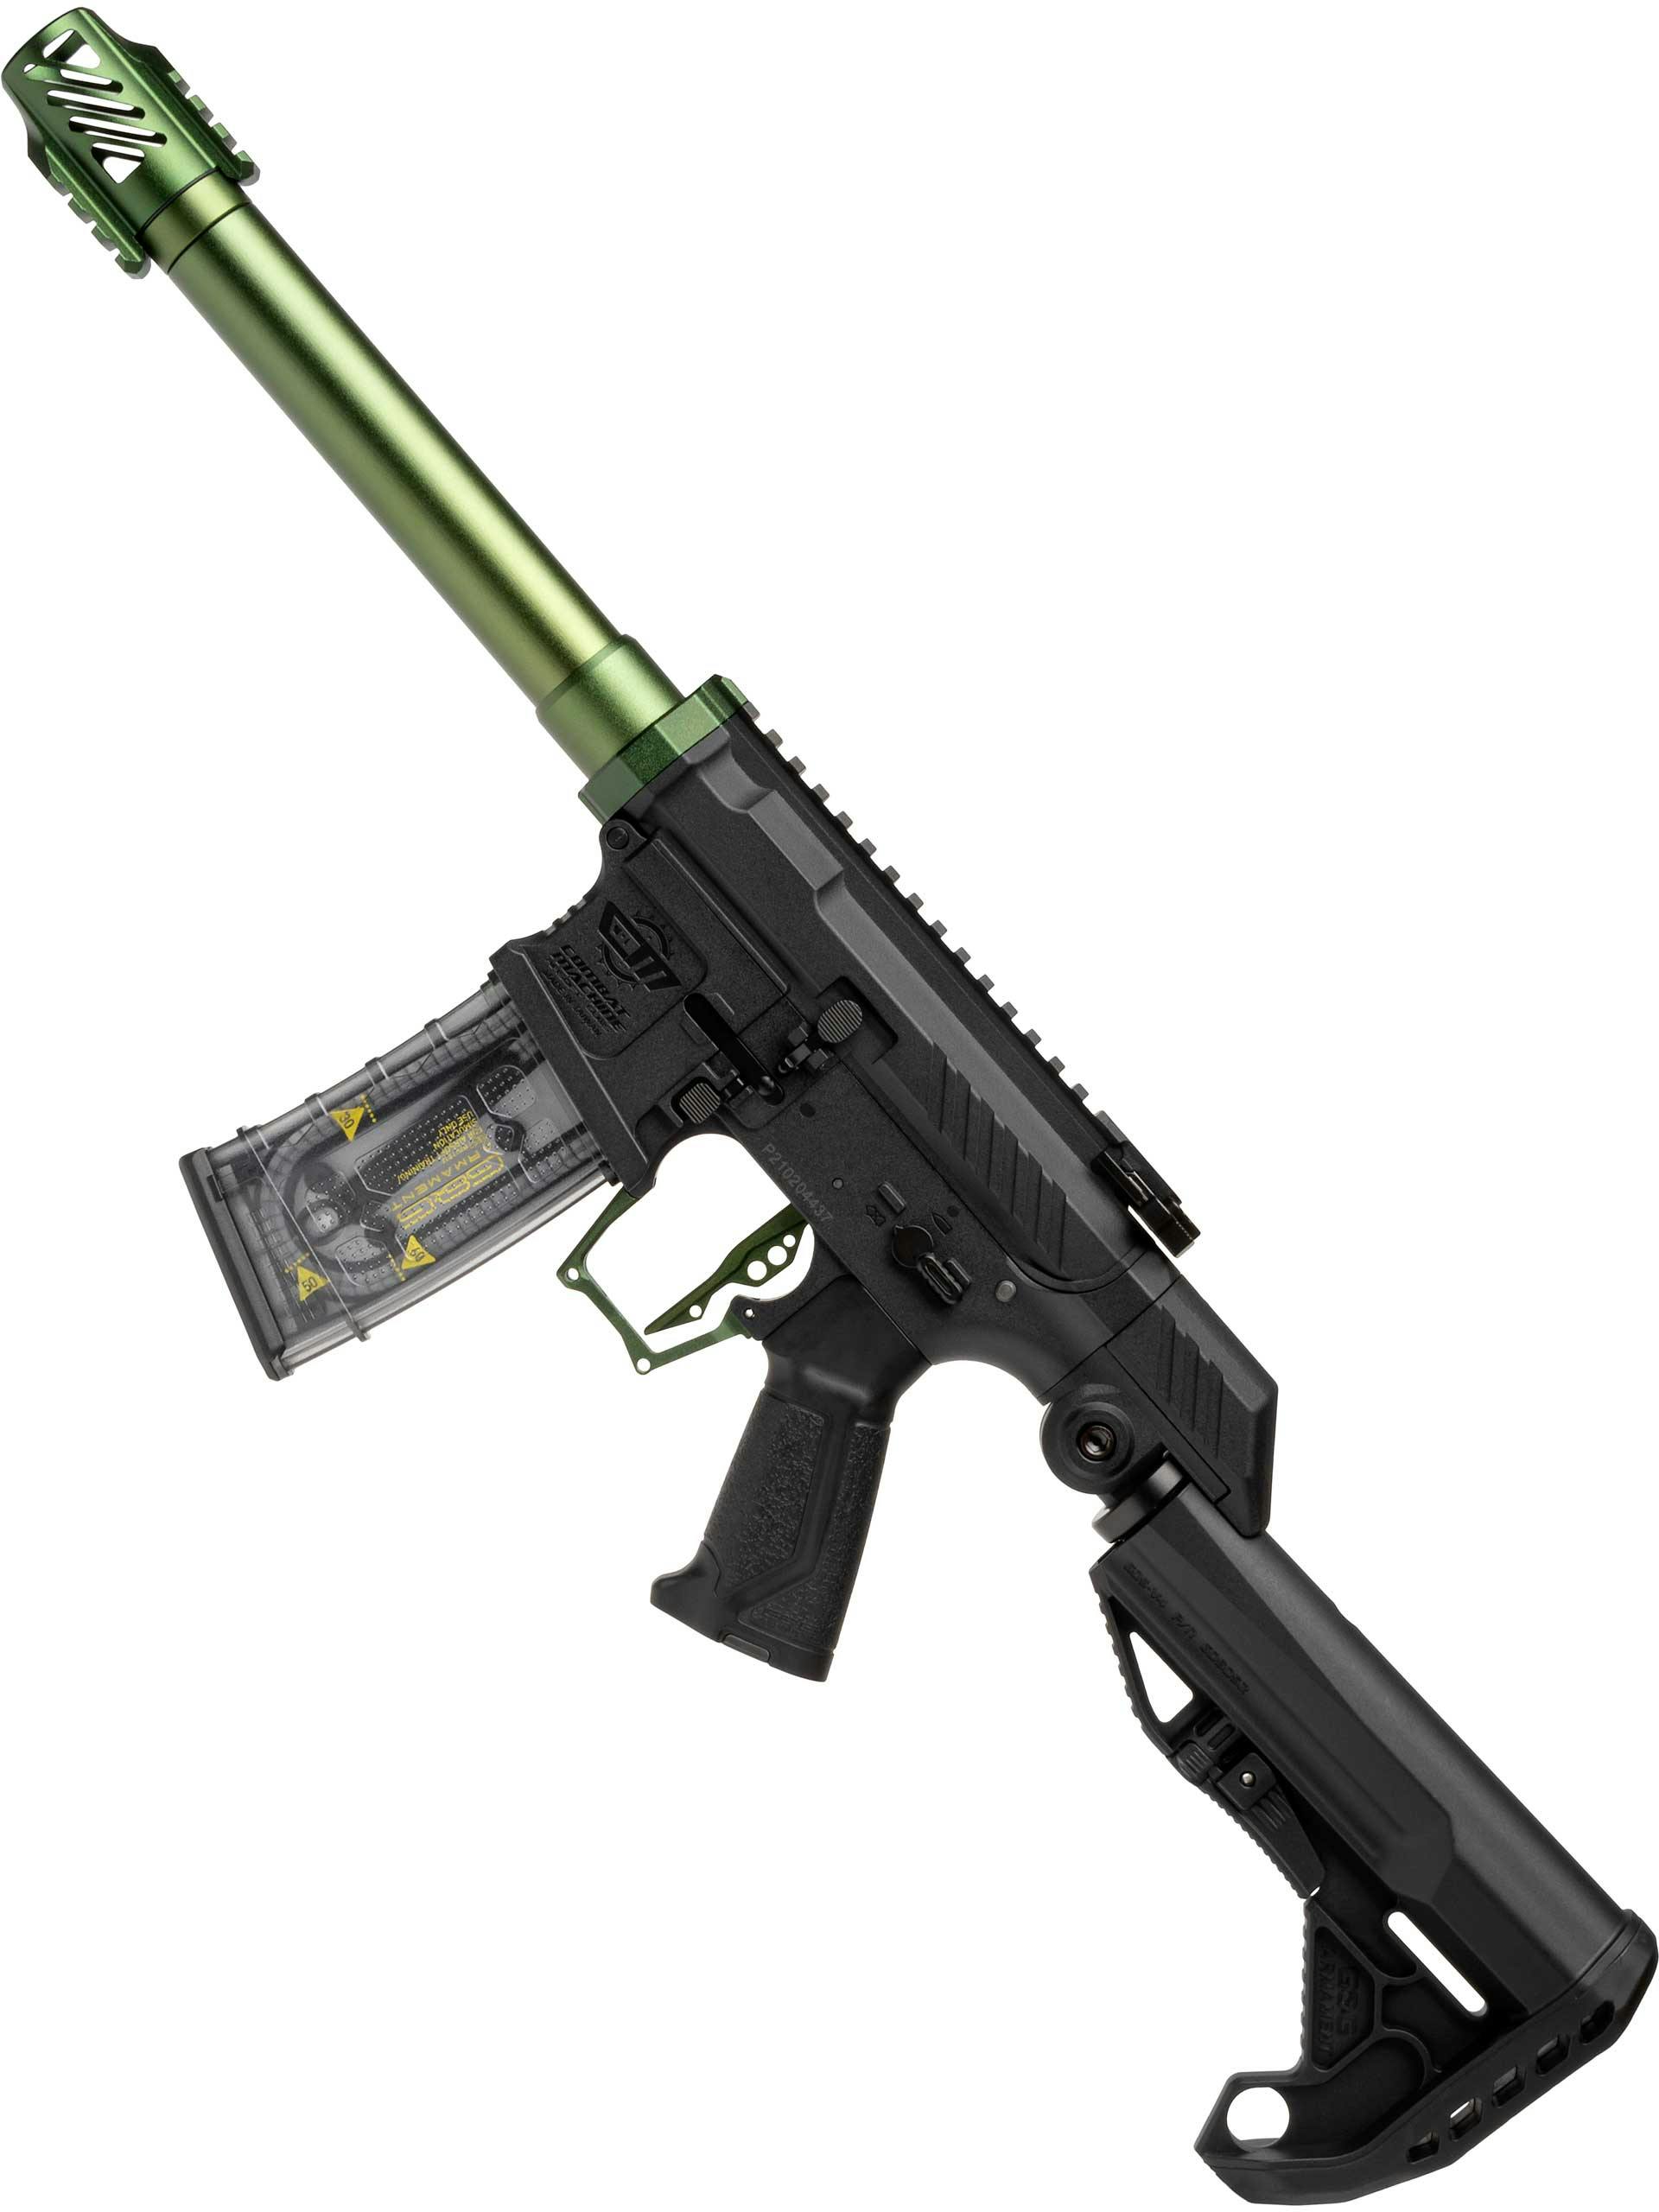 SSG-1 Airsoft Rifle by GG designed for Speedsoft UK